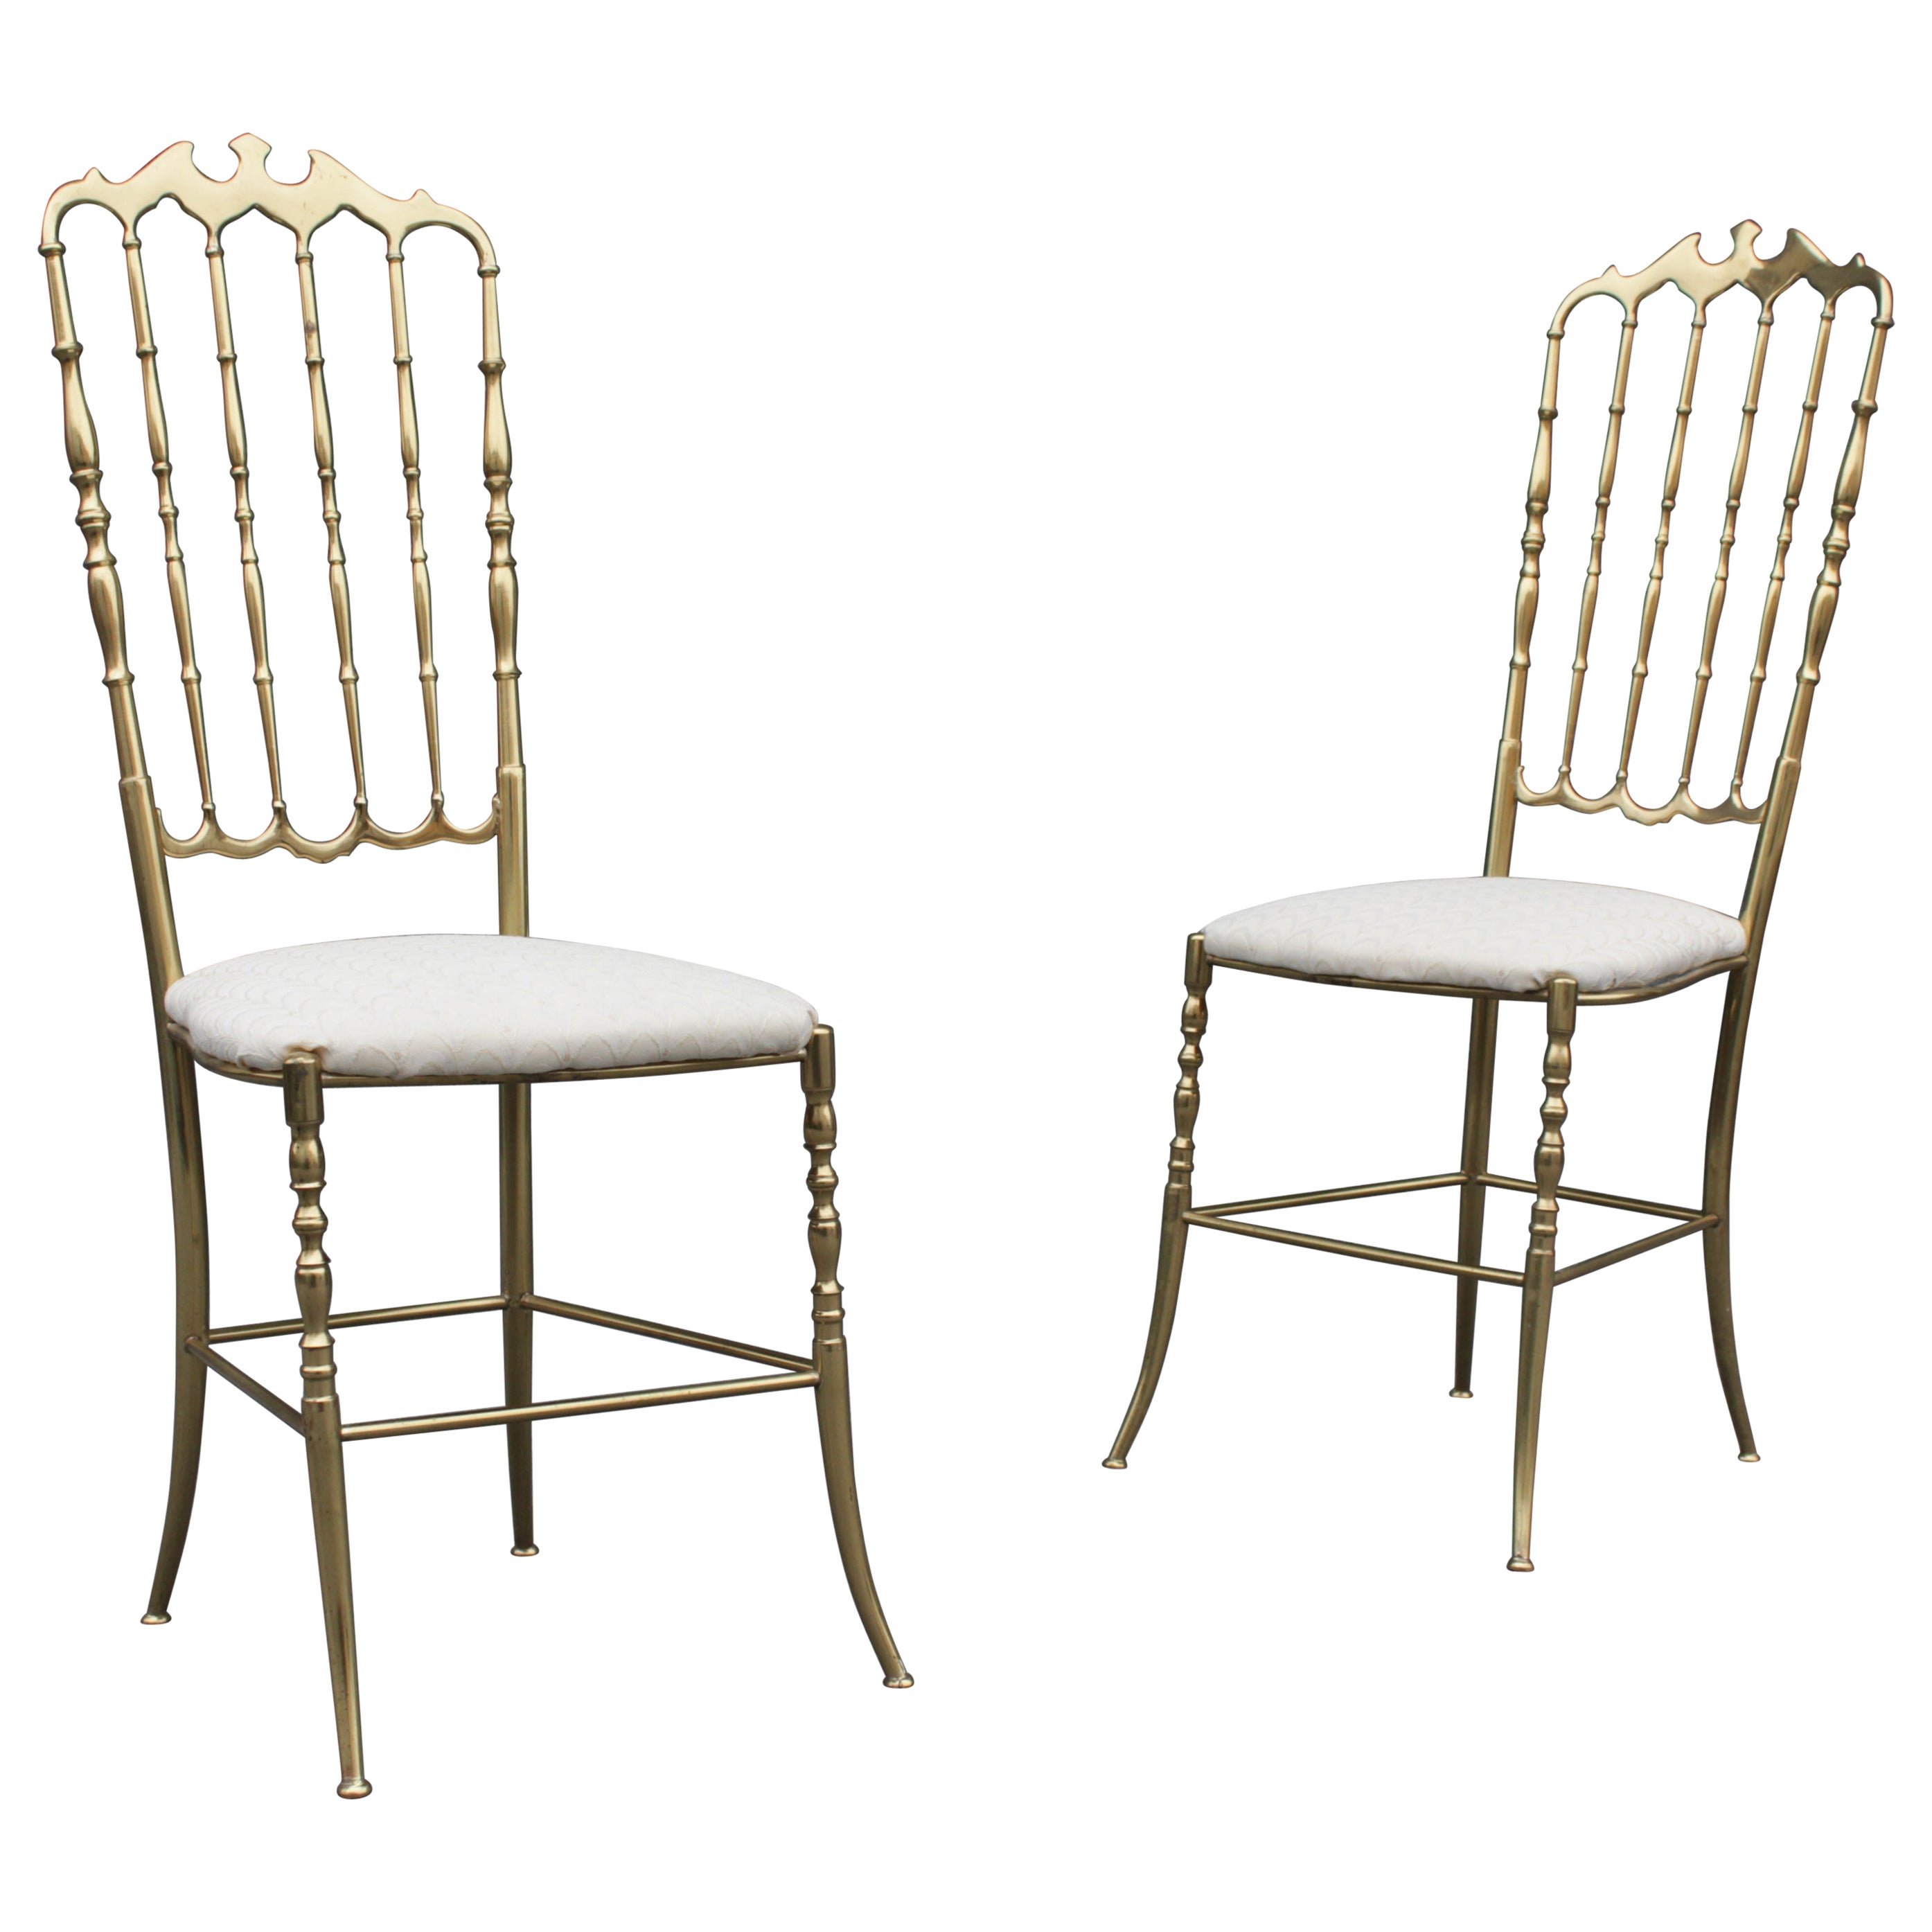 Pair of Solid Brass & White Upholstered Dining or Side Chairs by Chiavari Italy For Sale